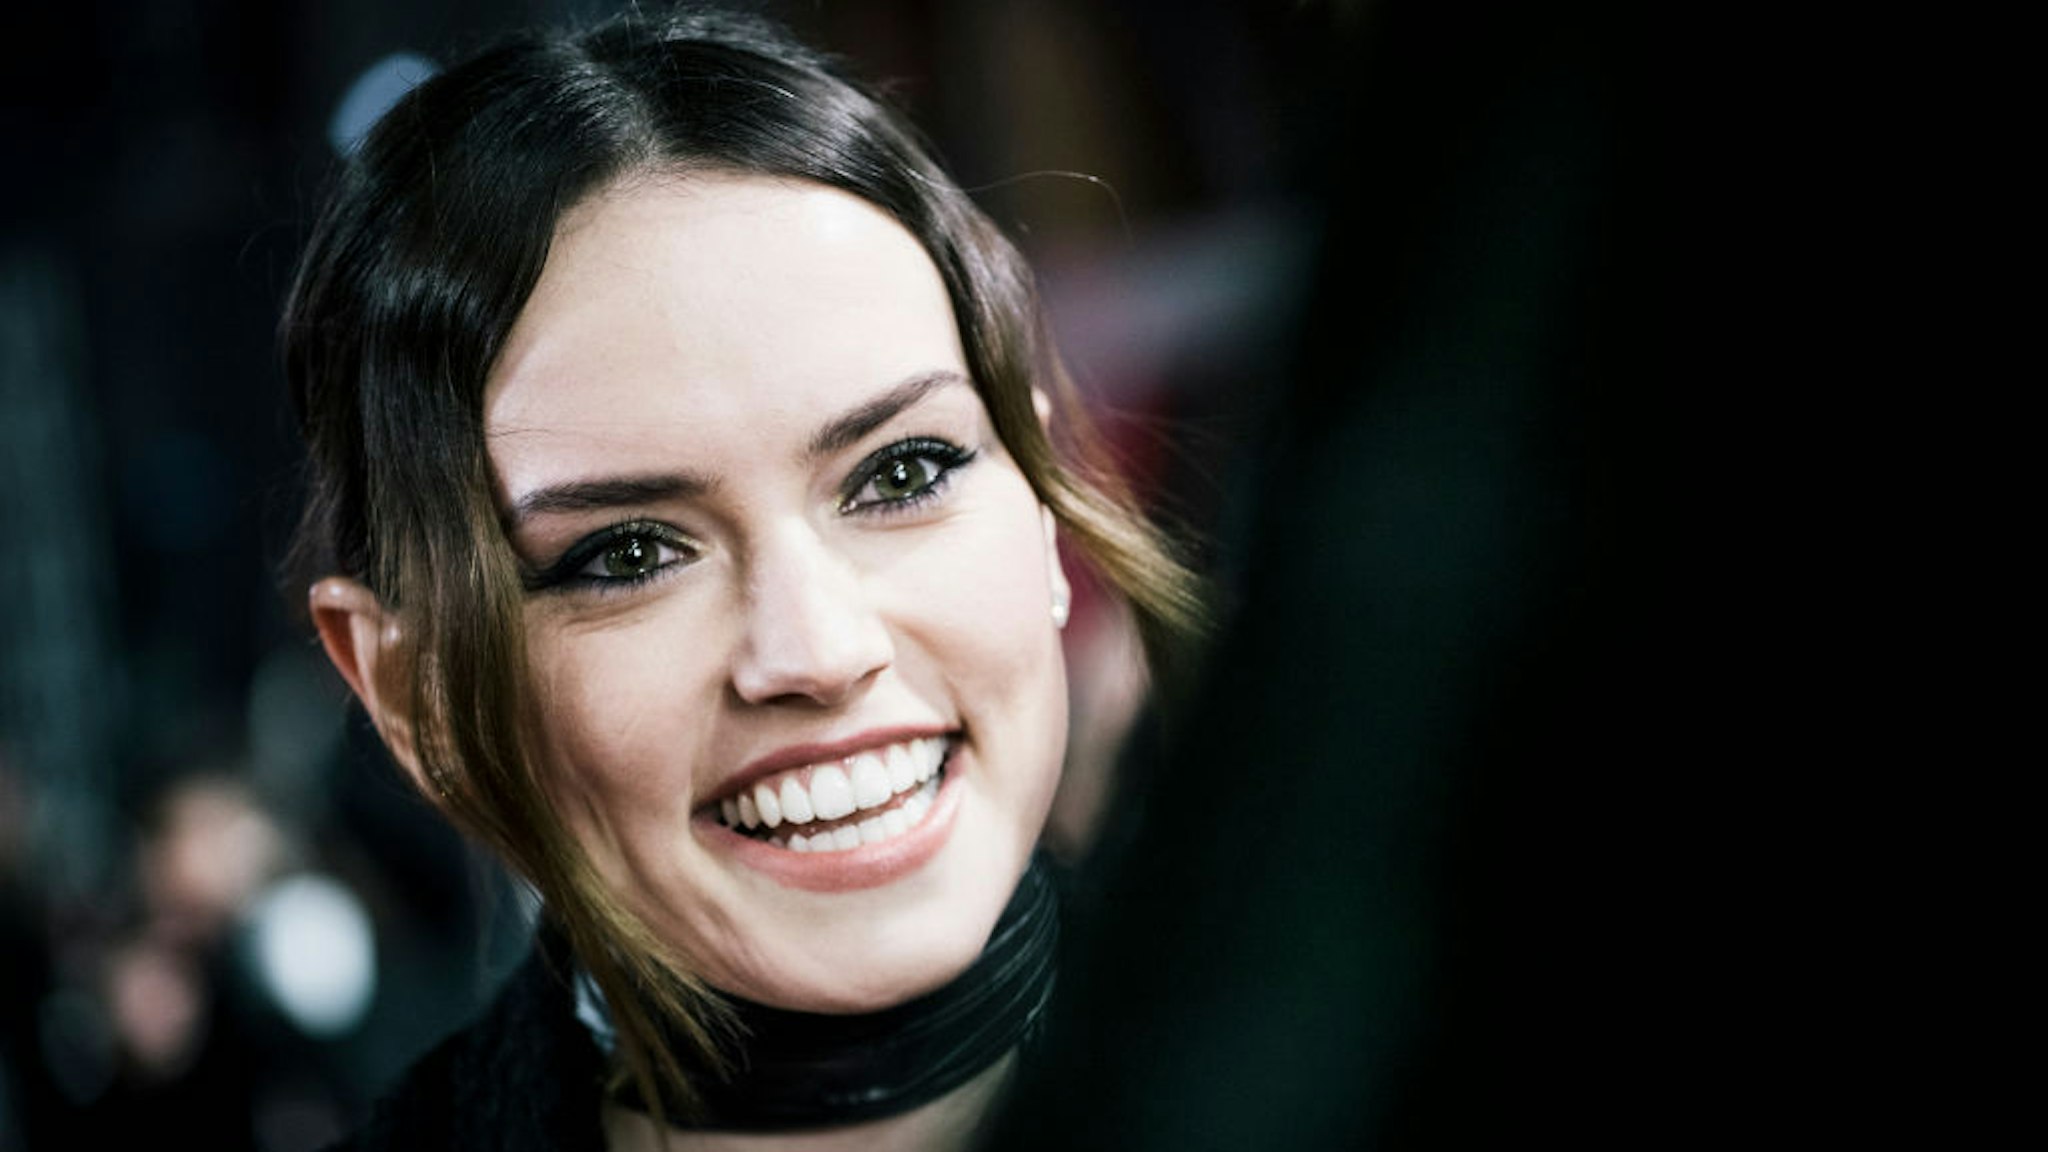 Daisy Ridley attends the European Premiere of Star Wars: The Last Jedi at the Royal Albert Hall on December 12, 2017 in London, England. (Photo by Gareth Cattermole/Getty Images for Disney)